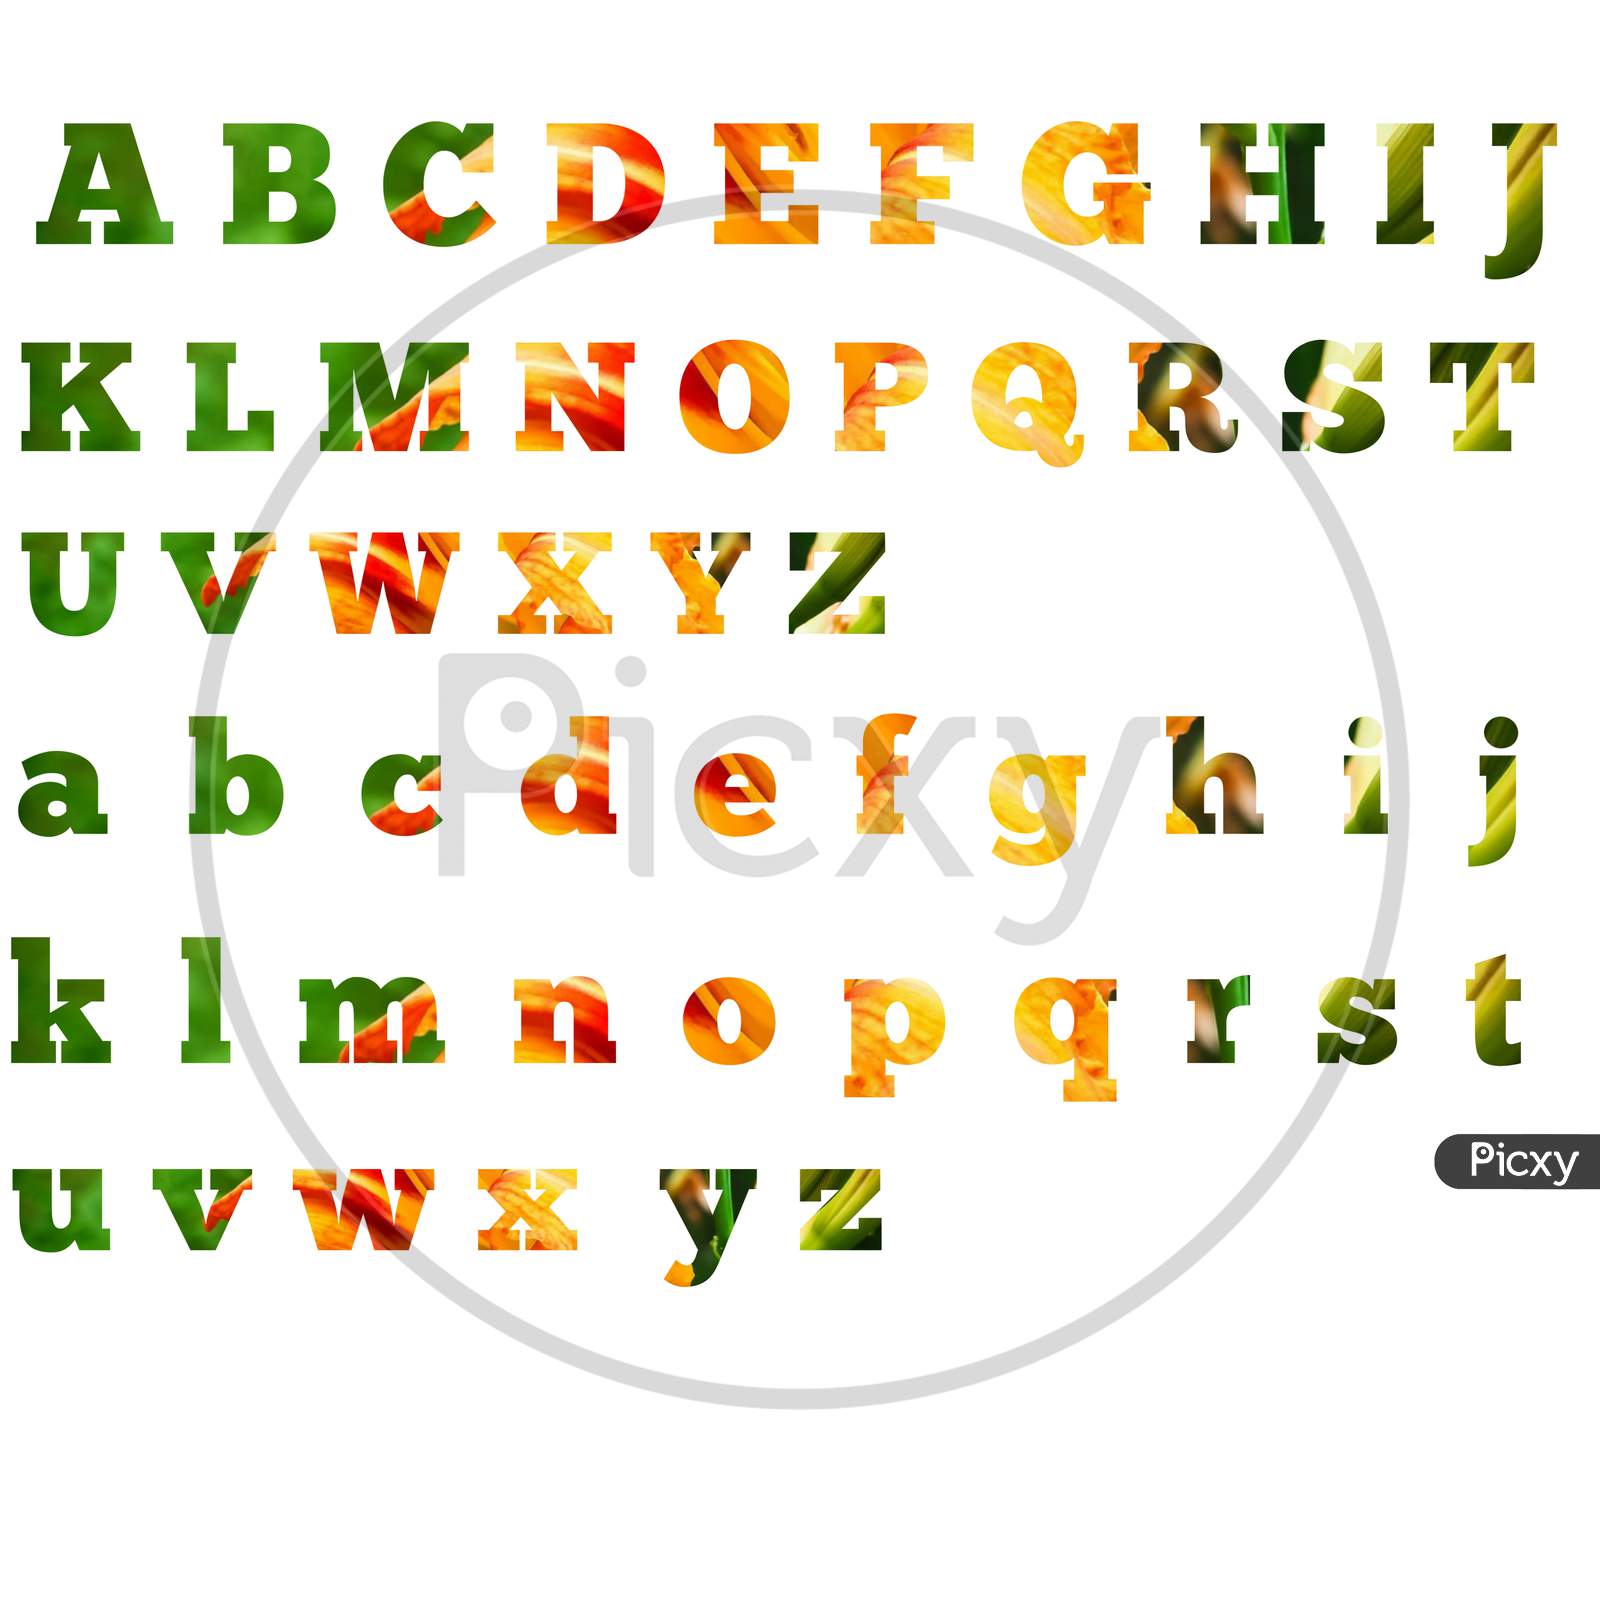 Image of A to Z alphabet letter design-RO497070-Picxy